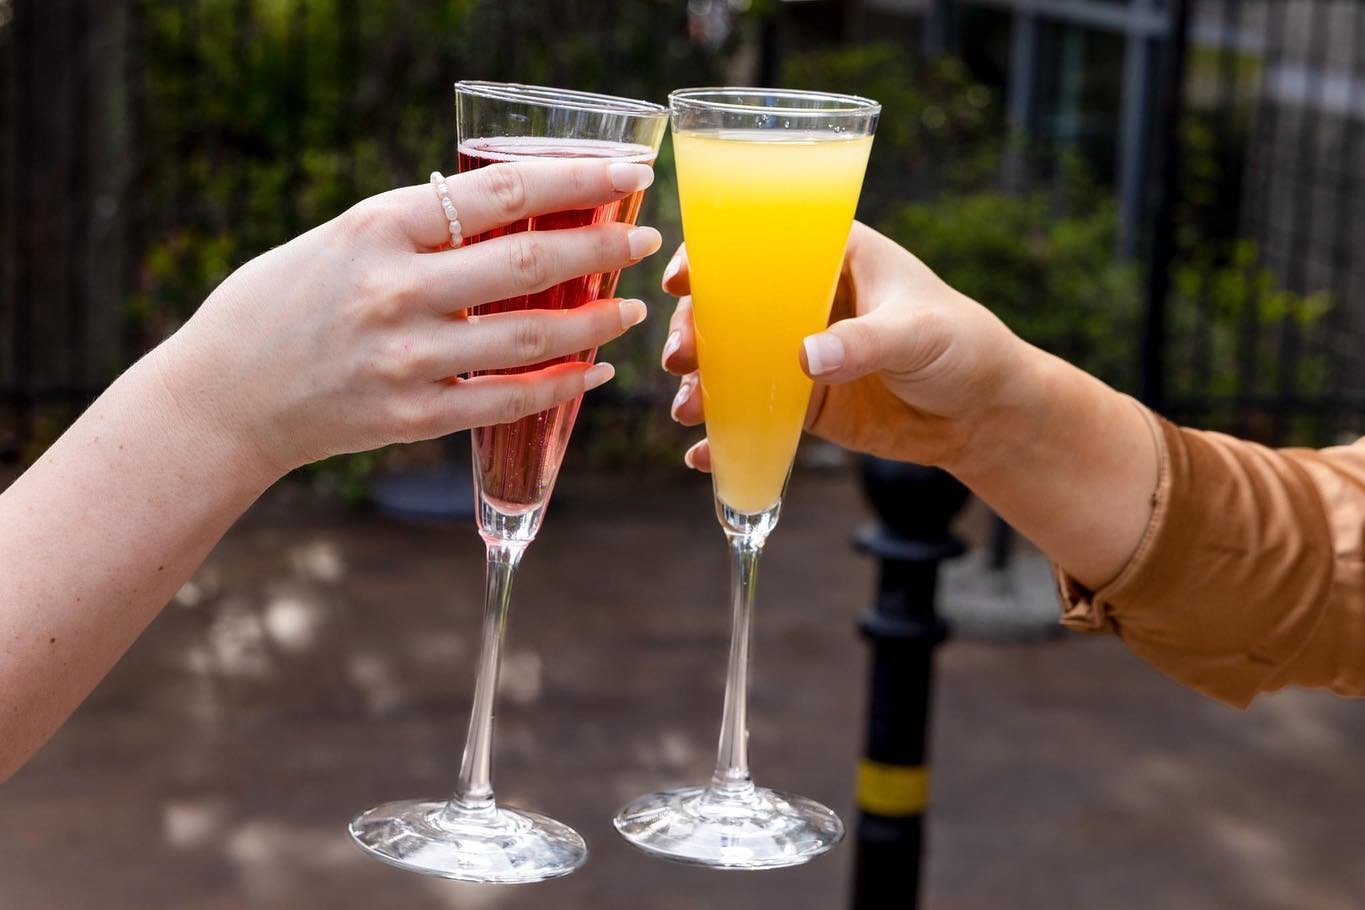 Treat Mom to Mother&rsquo;s Day brunch at Half Shell. ✨🥂 Sunday Brunch starts at 10:30AM tomorrow! 

View our brunch + dinner menus at halfshelloysterhouse.com. 

#HalfShellOysterHouse #MothersDayBrunch #HapyMothersDay #Brunch #Mimosas #BloodyMarys 